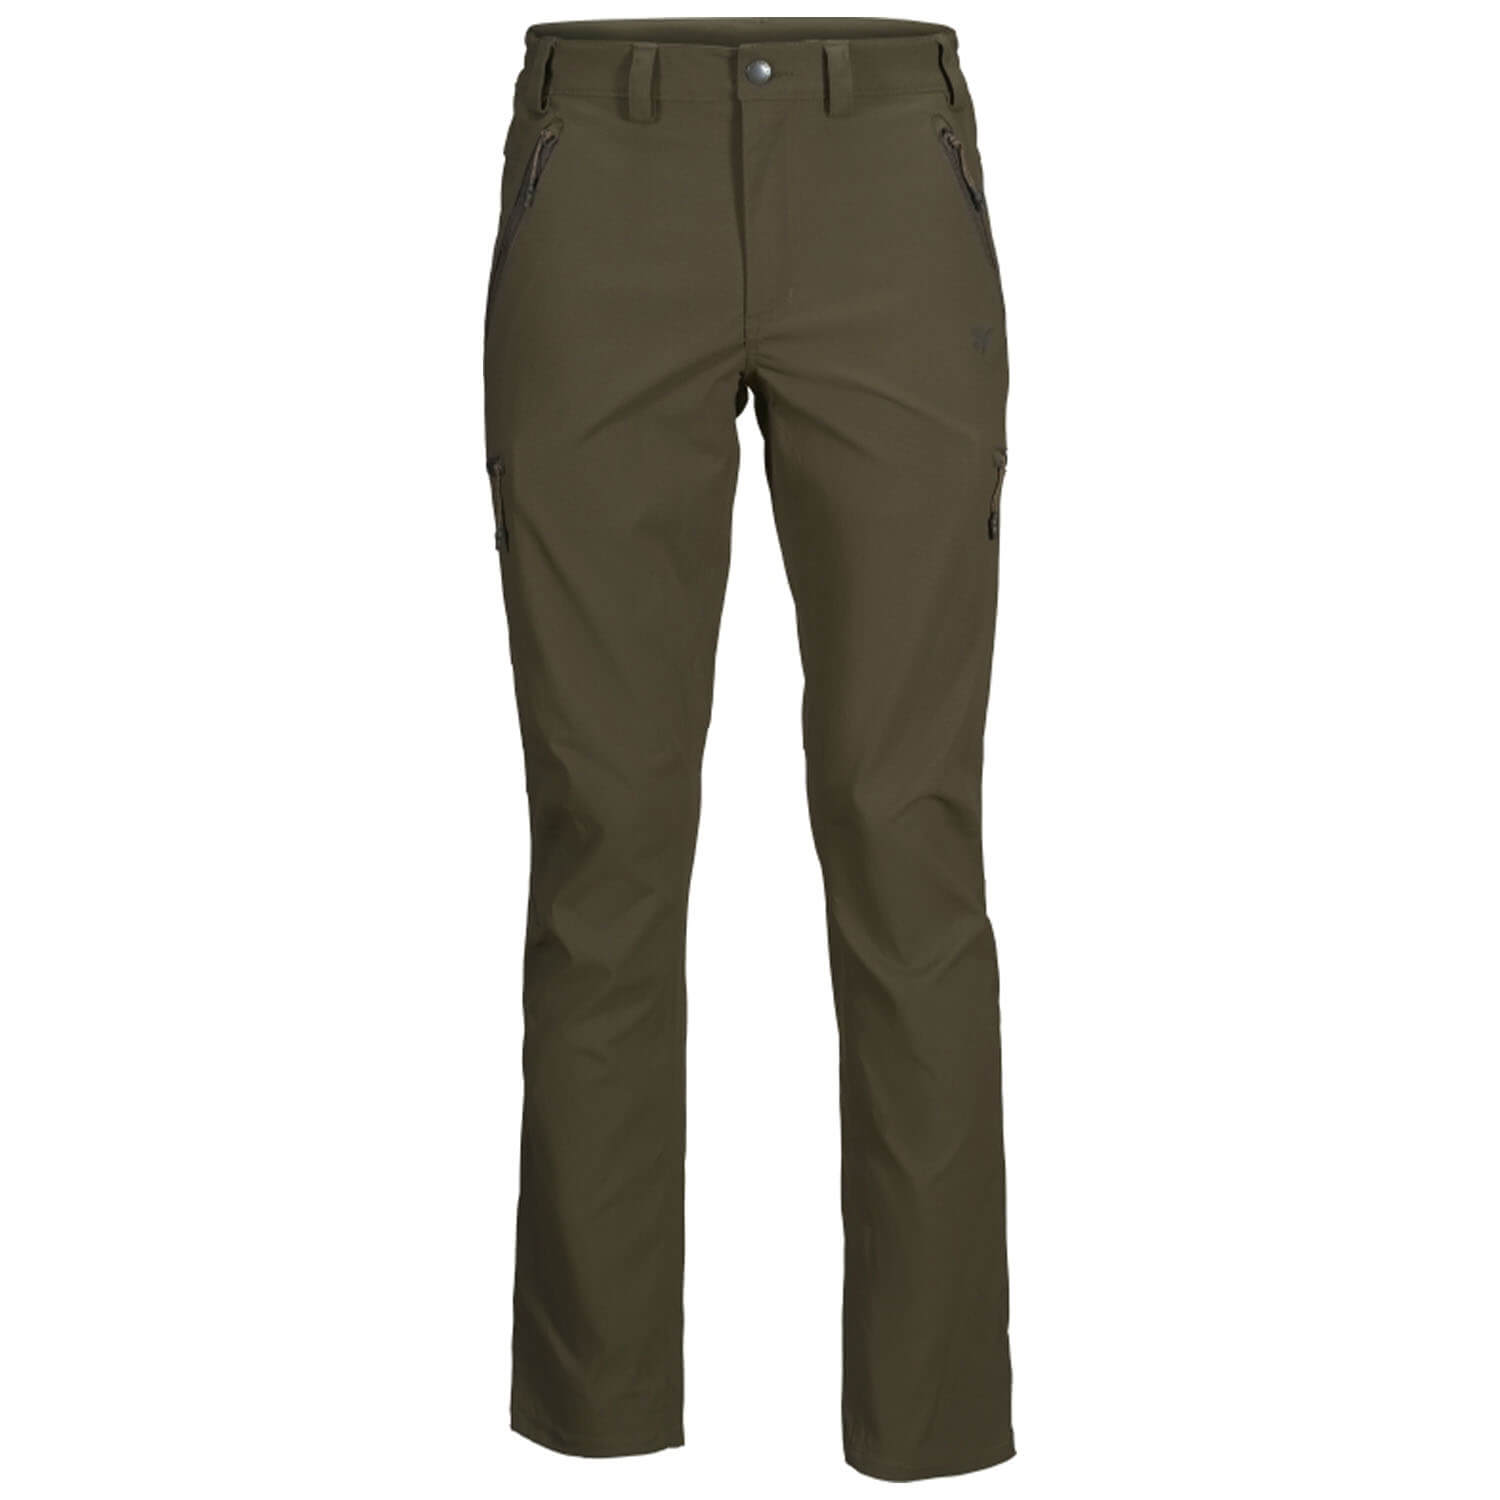 Seeland hunting pants outdoor stretch (pine green) - Hunting Trousers